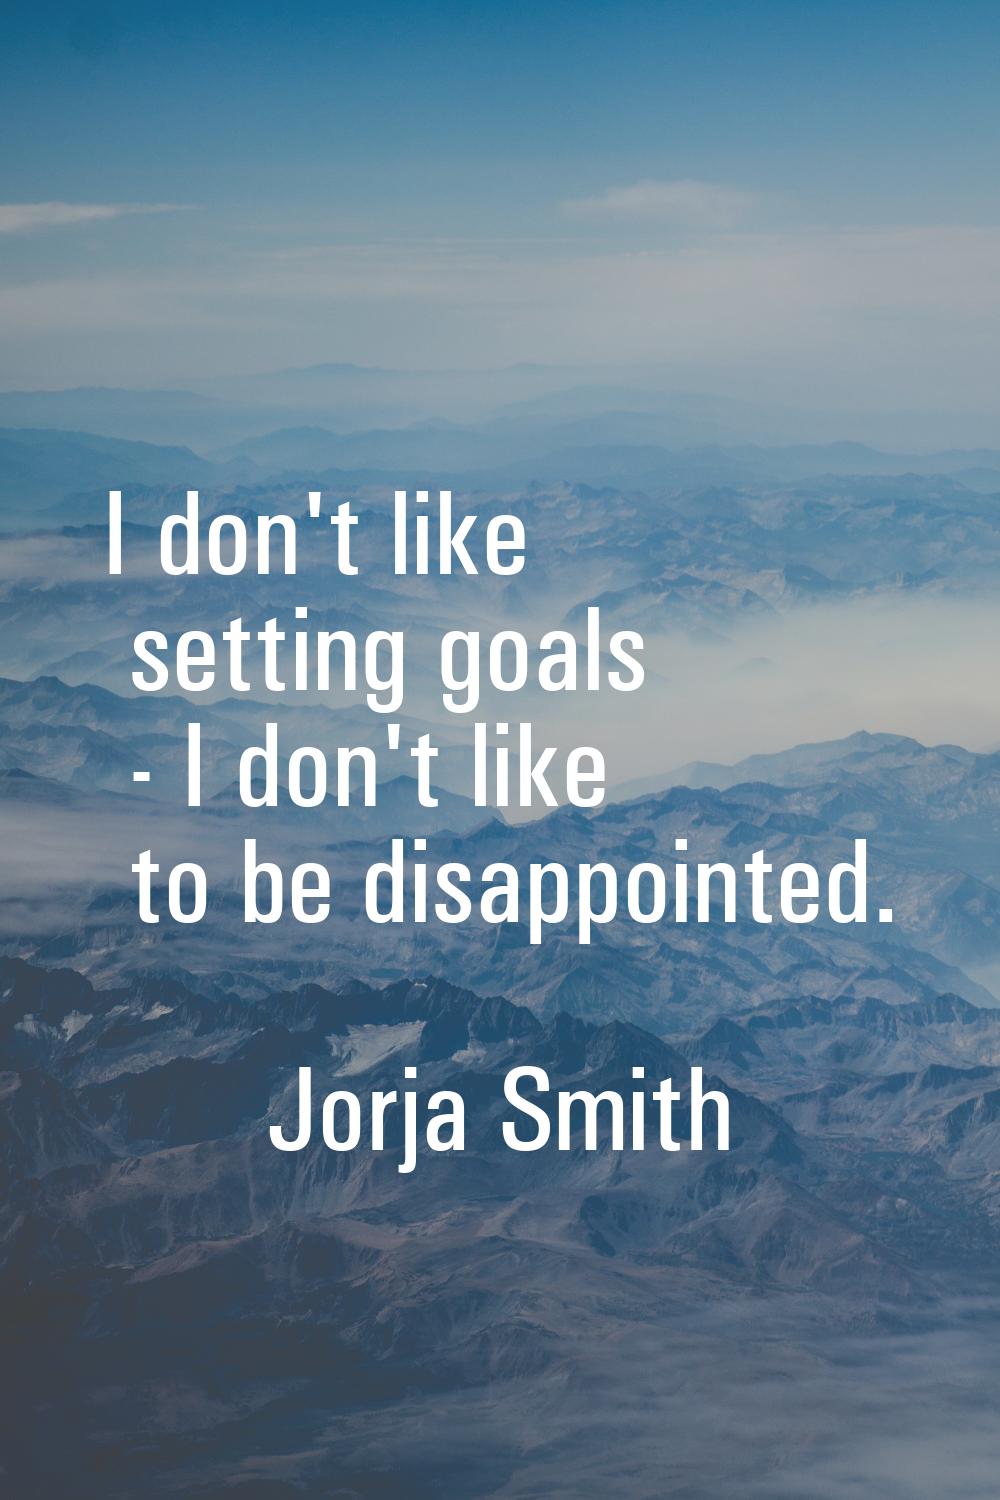 I don't like setting goals - I don't like to be disappointed.